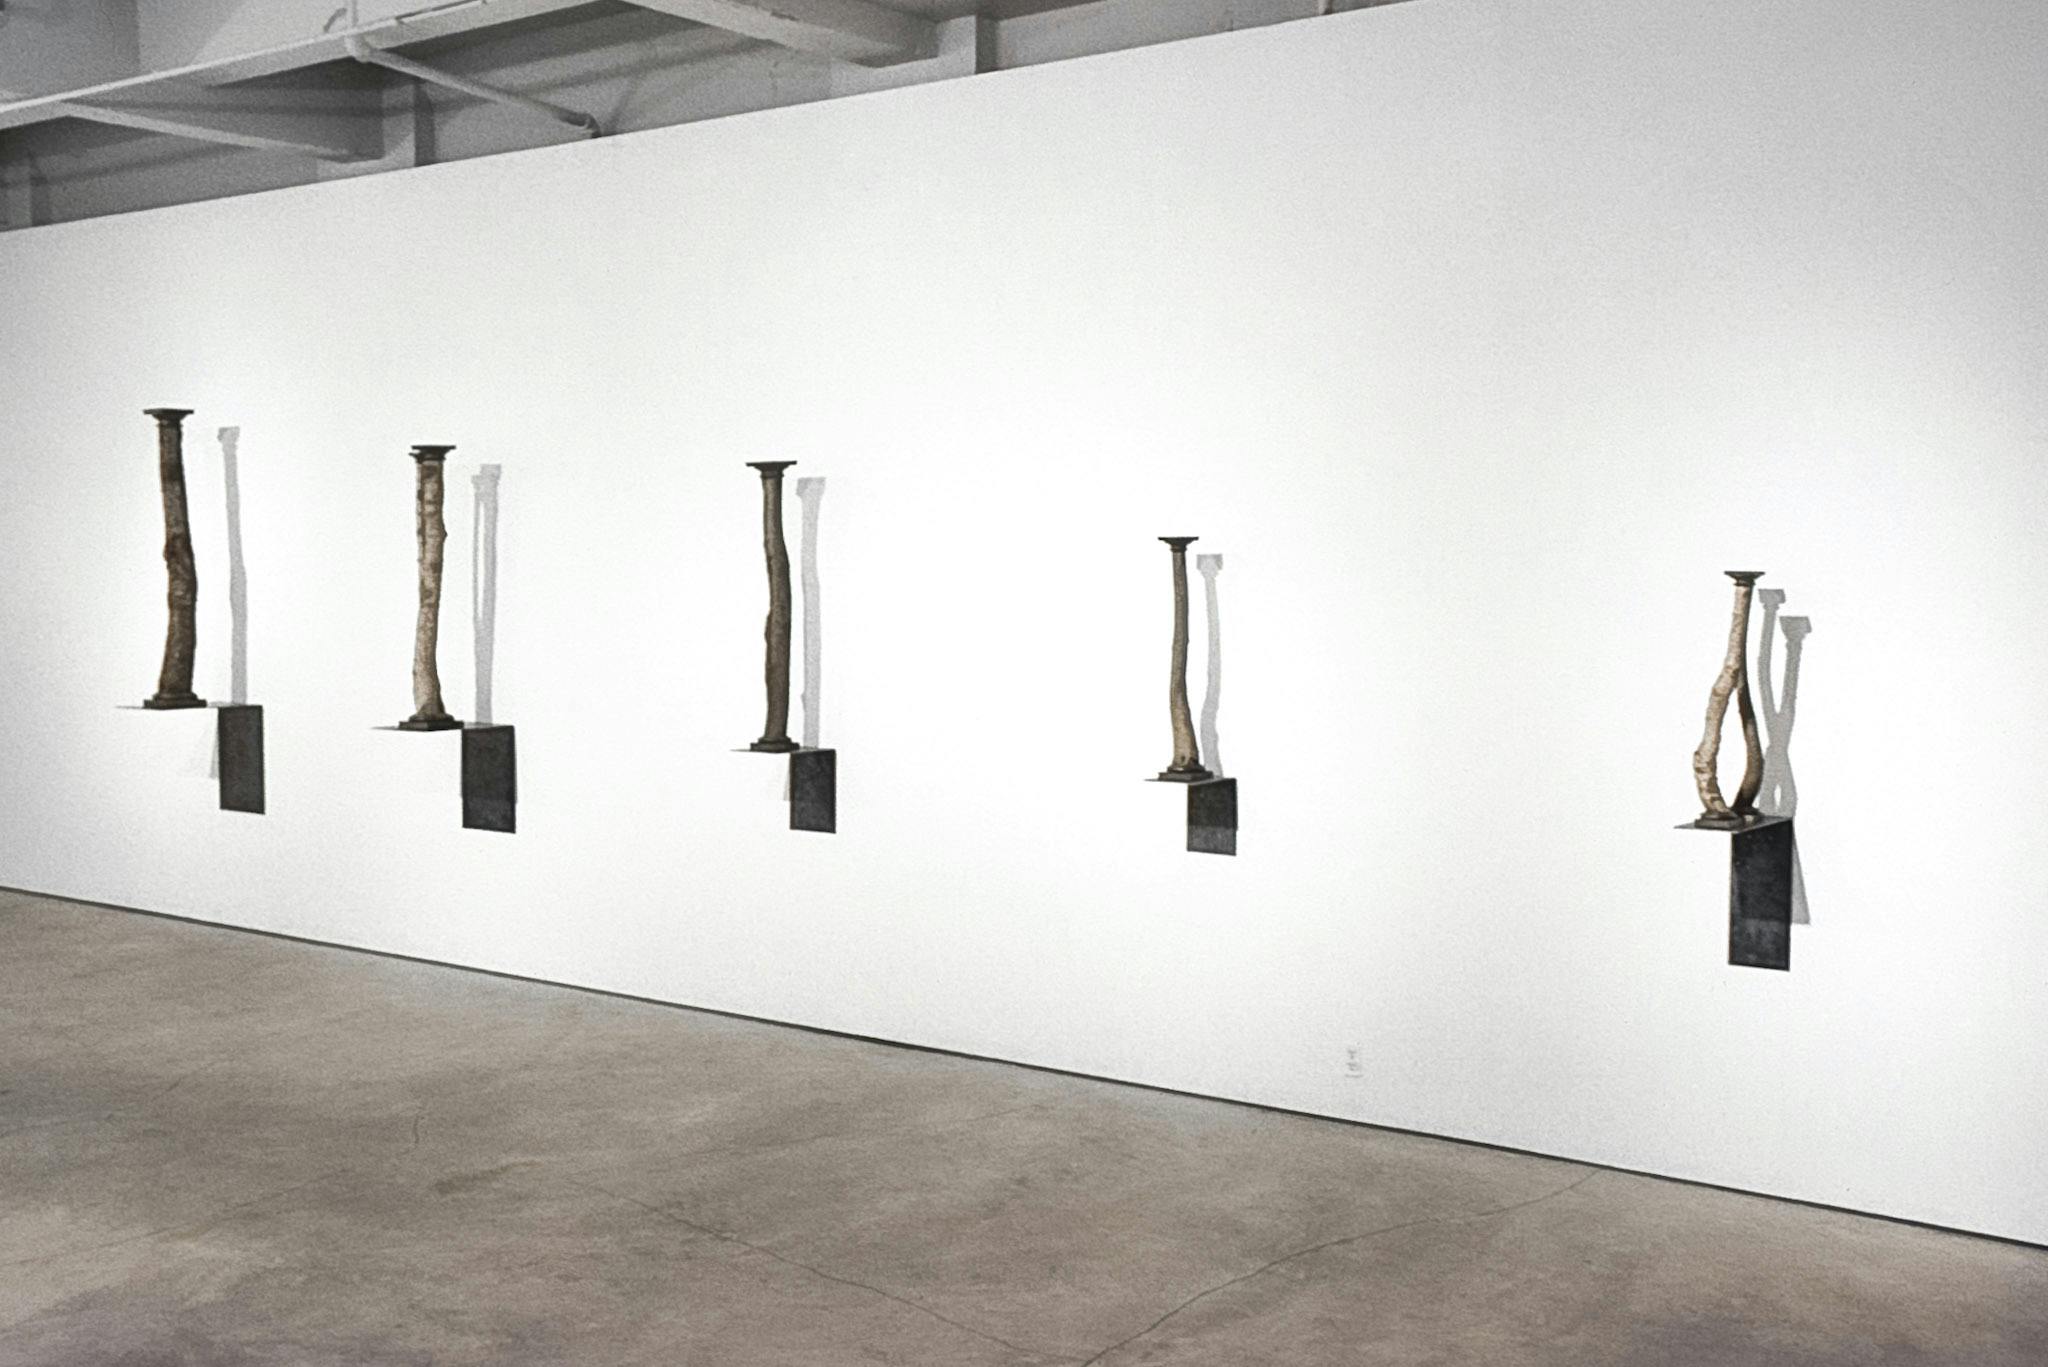 5 artworks on narrow metal shelves, decreasing in size from left to right. The works are various tree trunks and branches, with pieces added to their tops and bottoms, making them resemble columns.